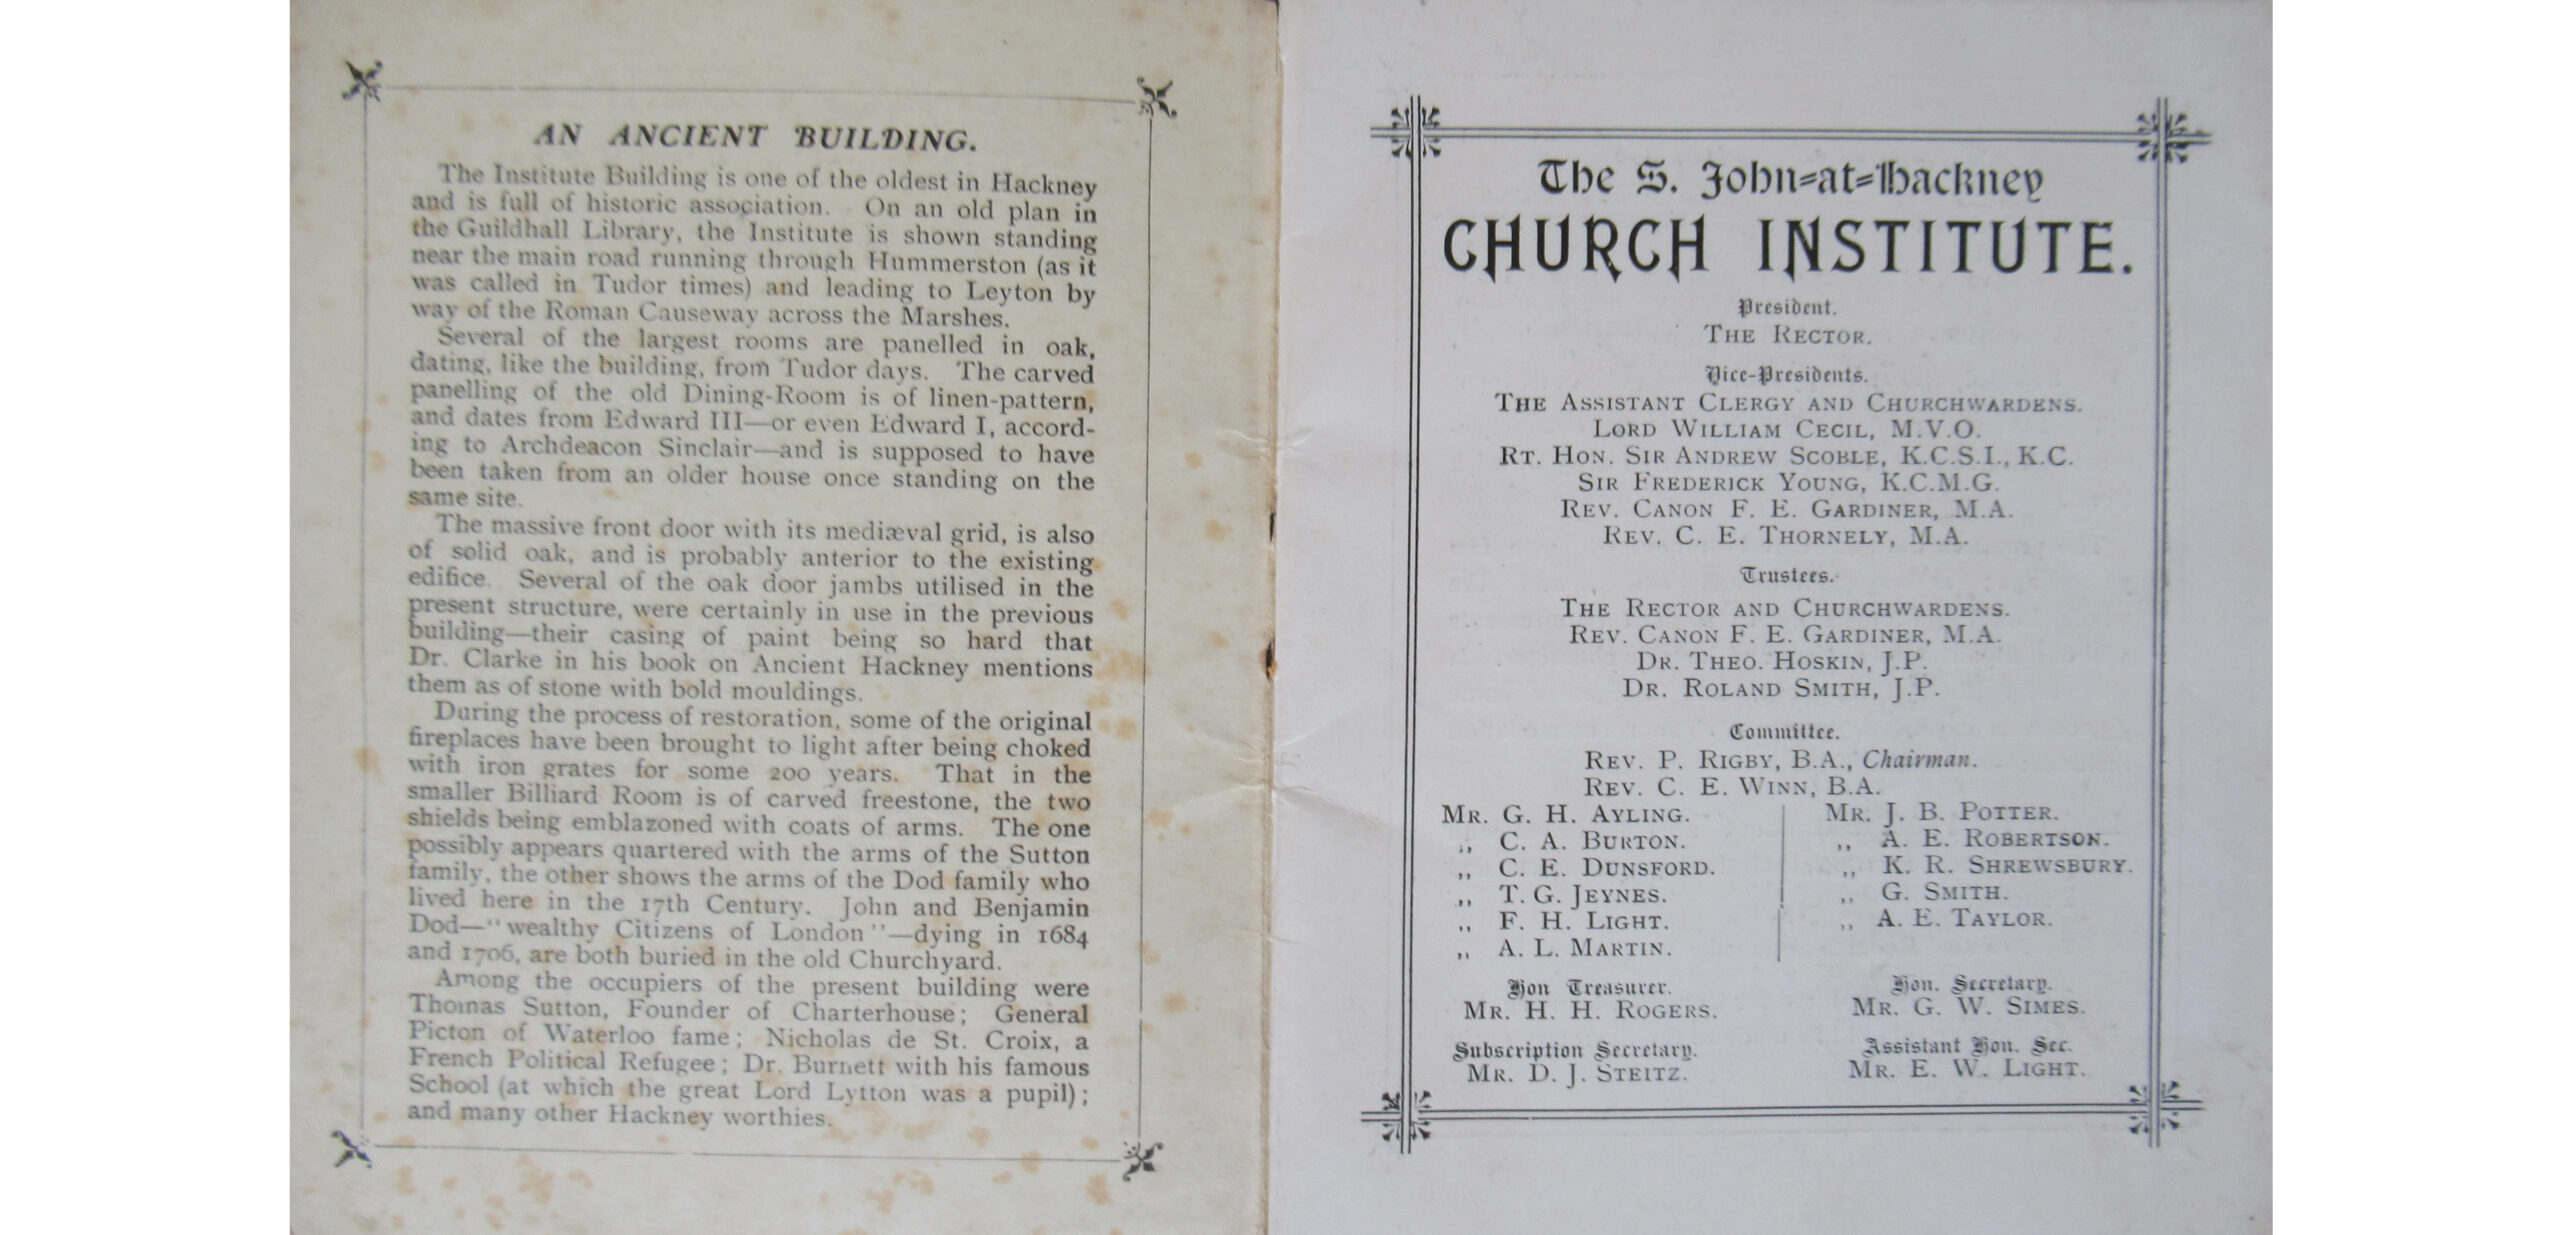 Two pages of the rules pamphlet for the St John at Hackney Church Institute. 